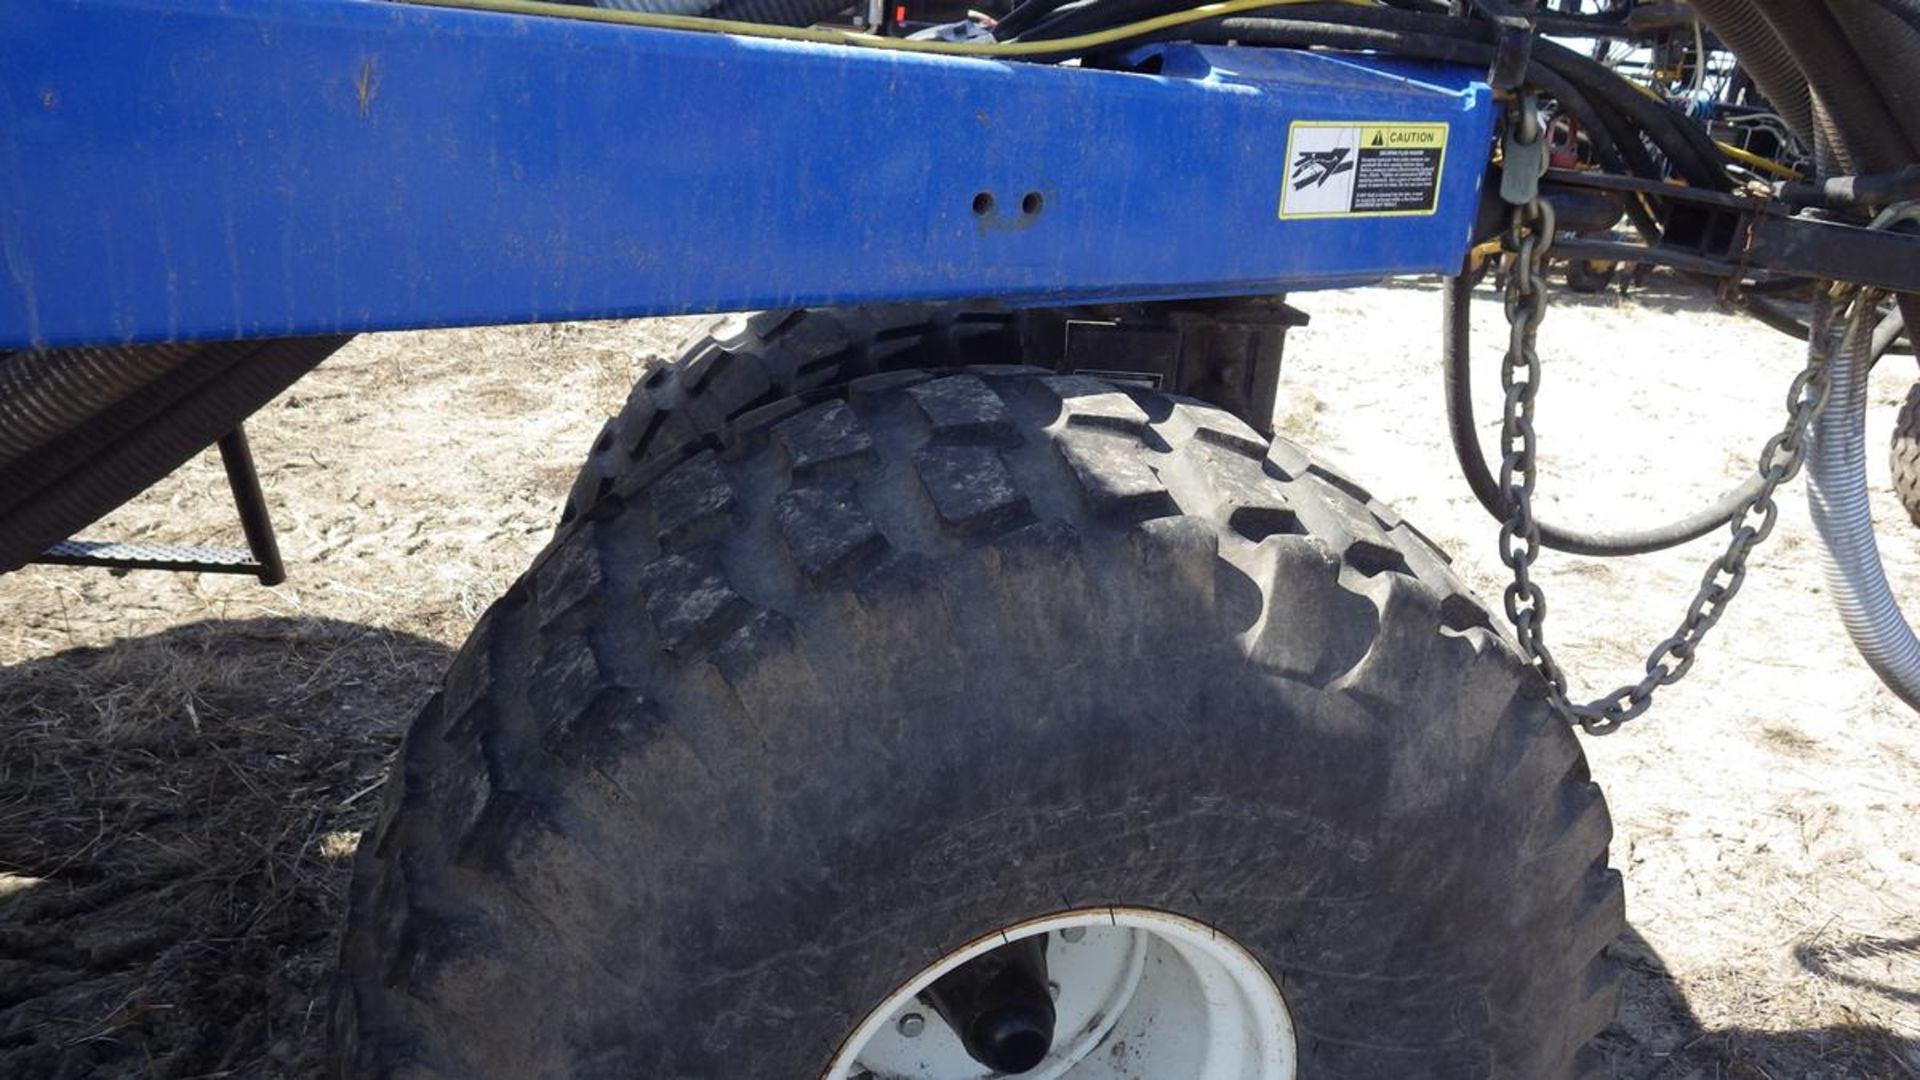 Monitor included! New Holland SC 380 Air Cart With auger Vin# NL011029 Tires front 22.5LX16.1 Rear - Image 2 of 12